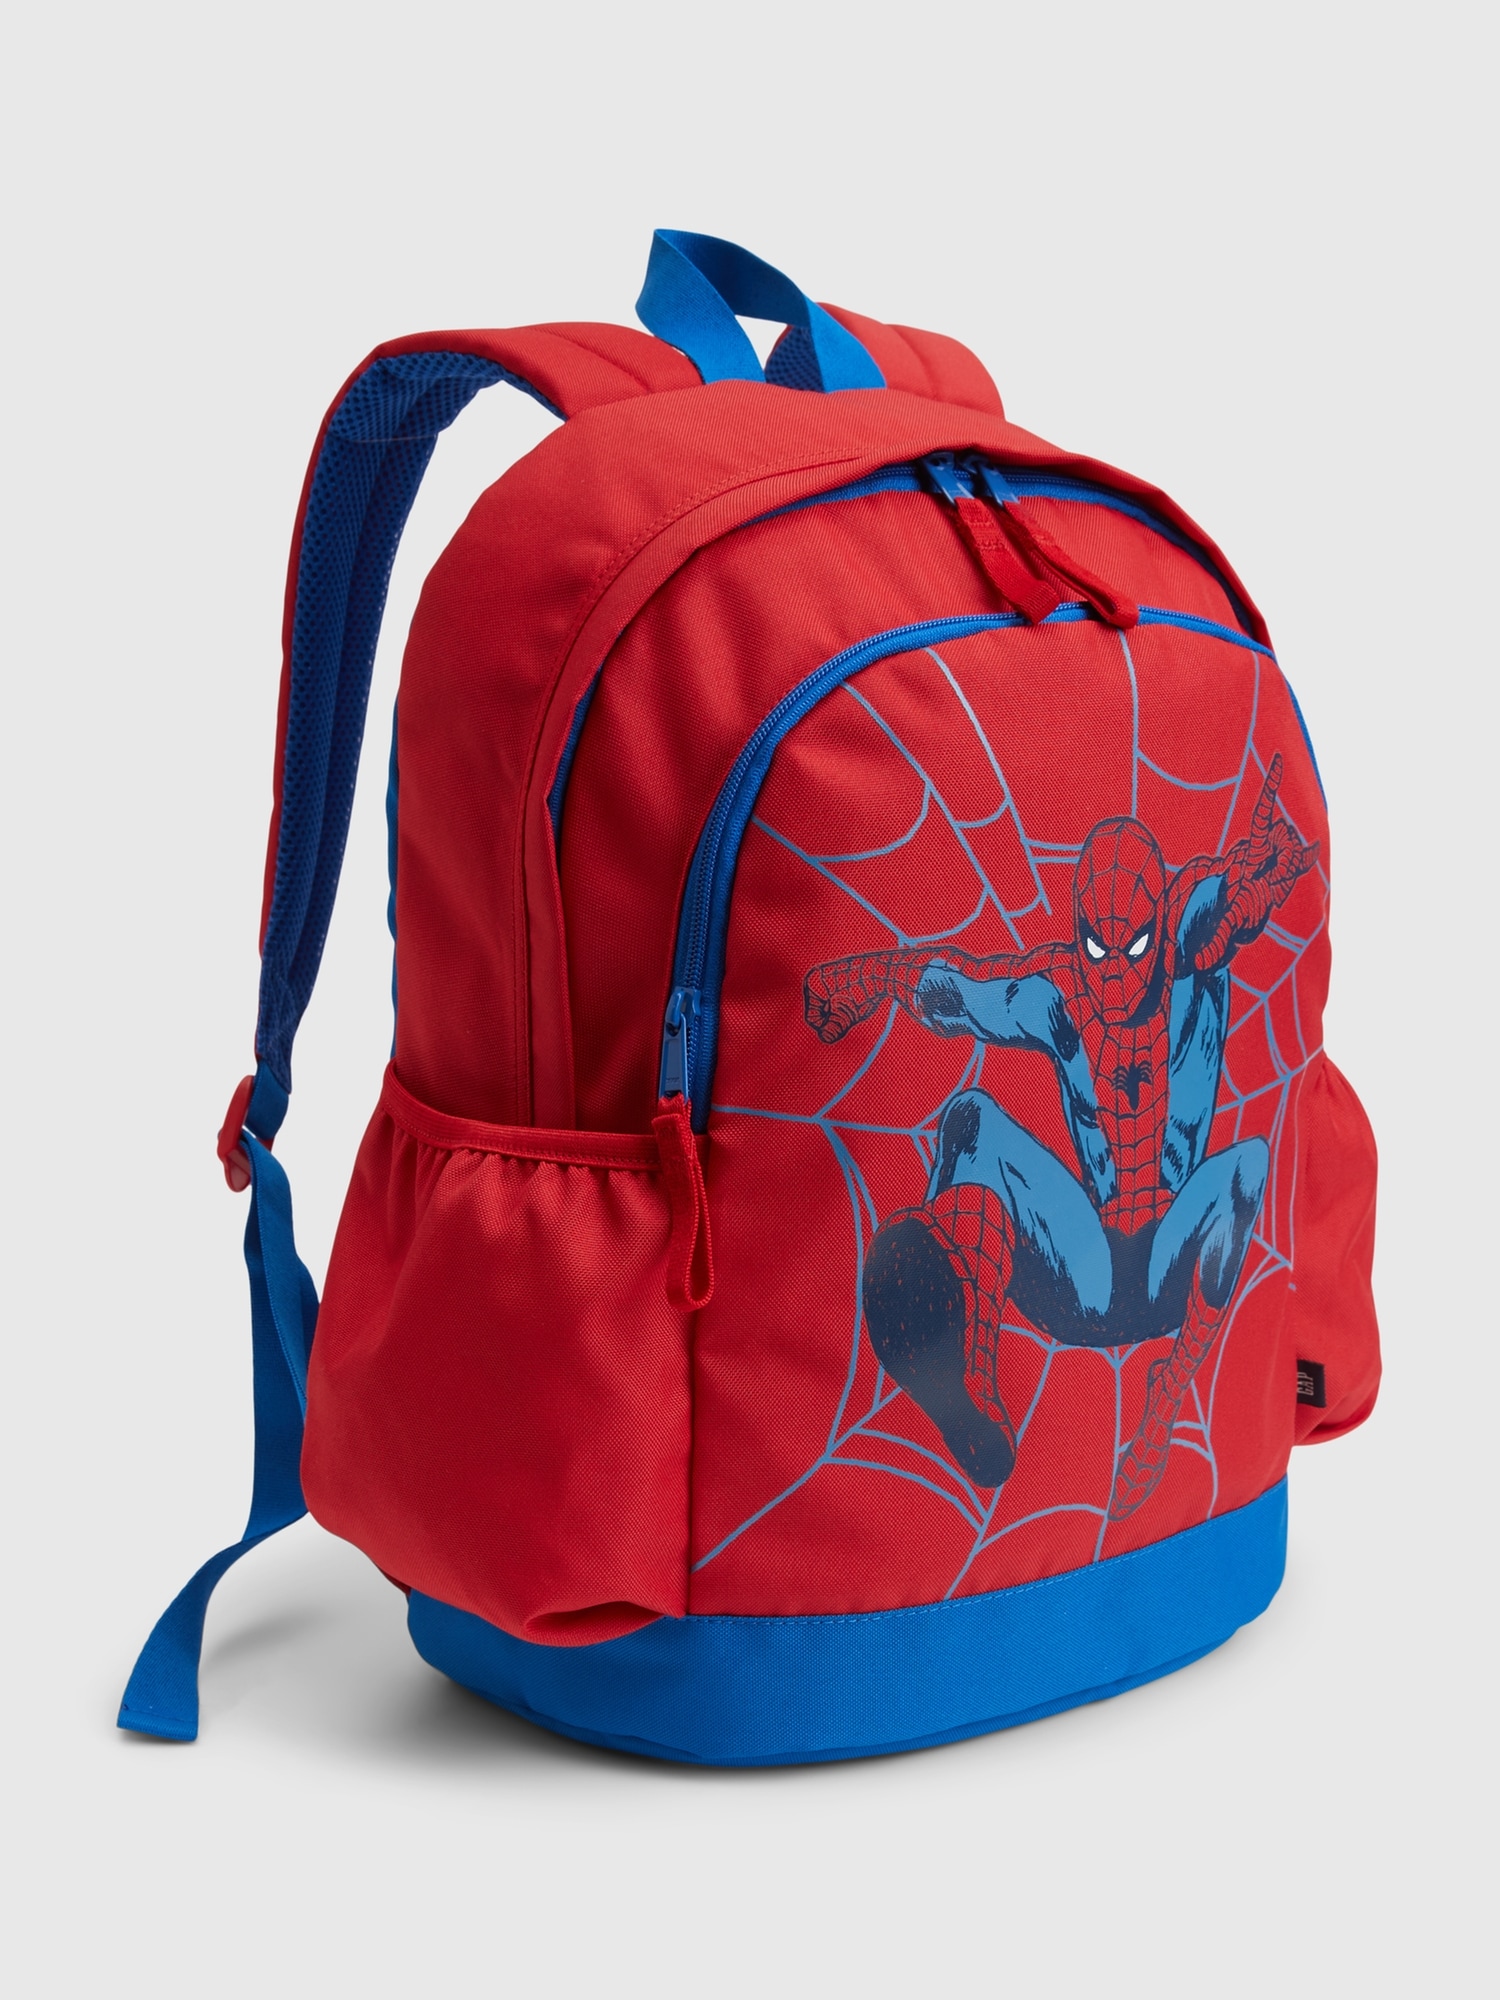 Gap Kids &#124 Marvel Recycled Backpack red. 1